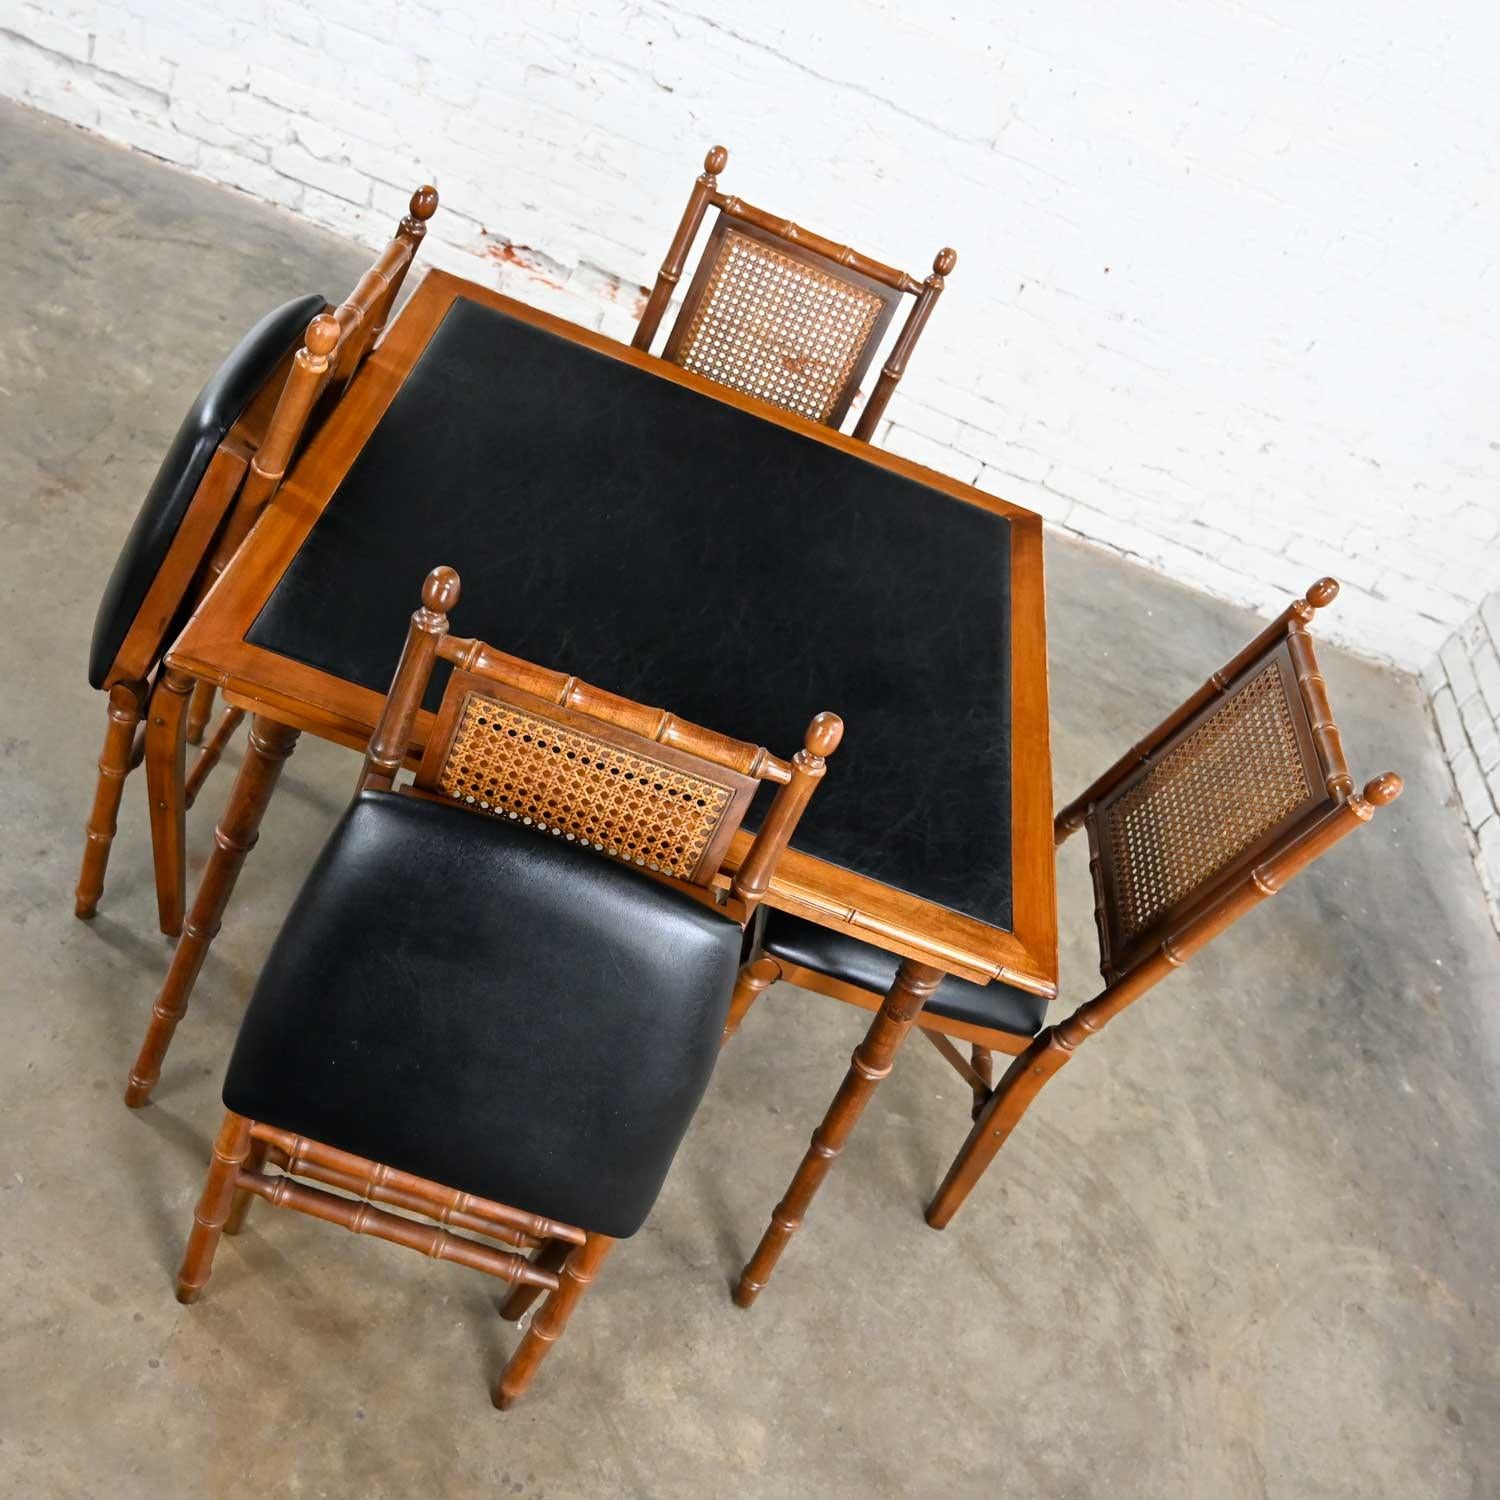 American Vintage Stakmore Campaign Style Faux Bamboo Folding Table 4 Chairs Faux Leather